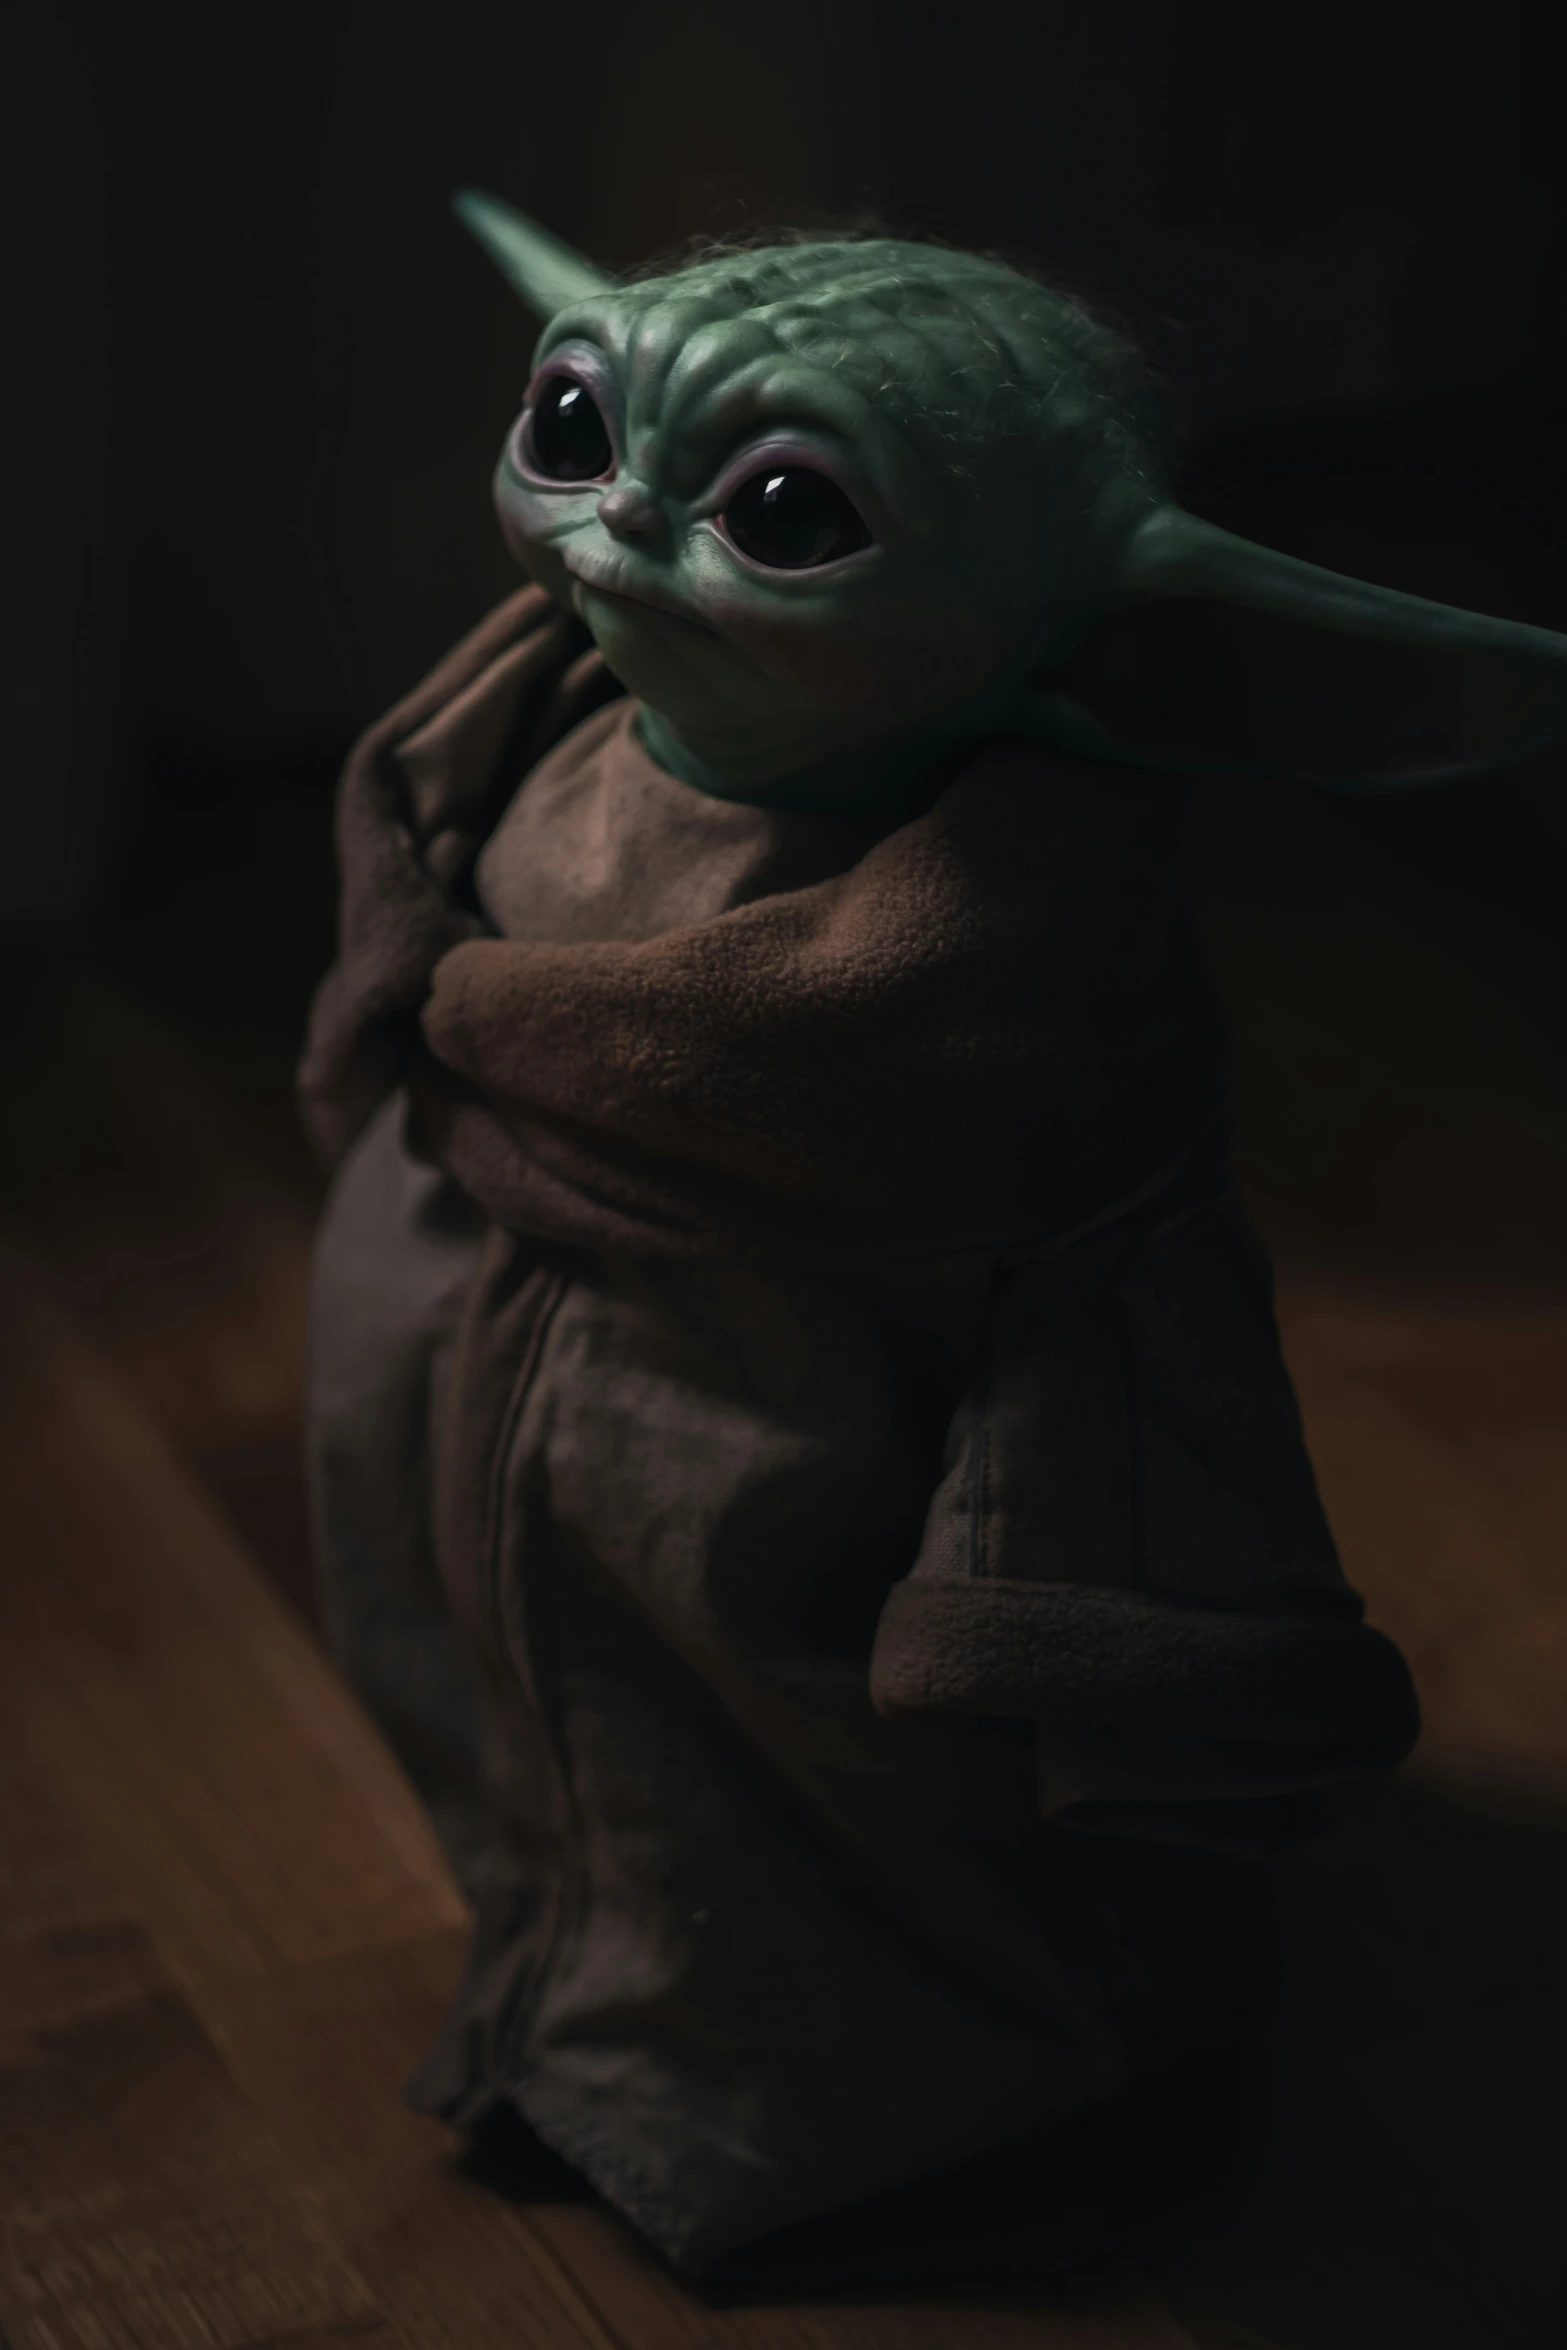 the baby yoda doll is in the dark